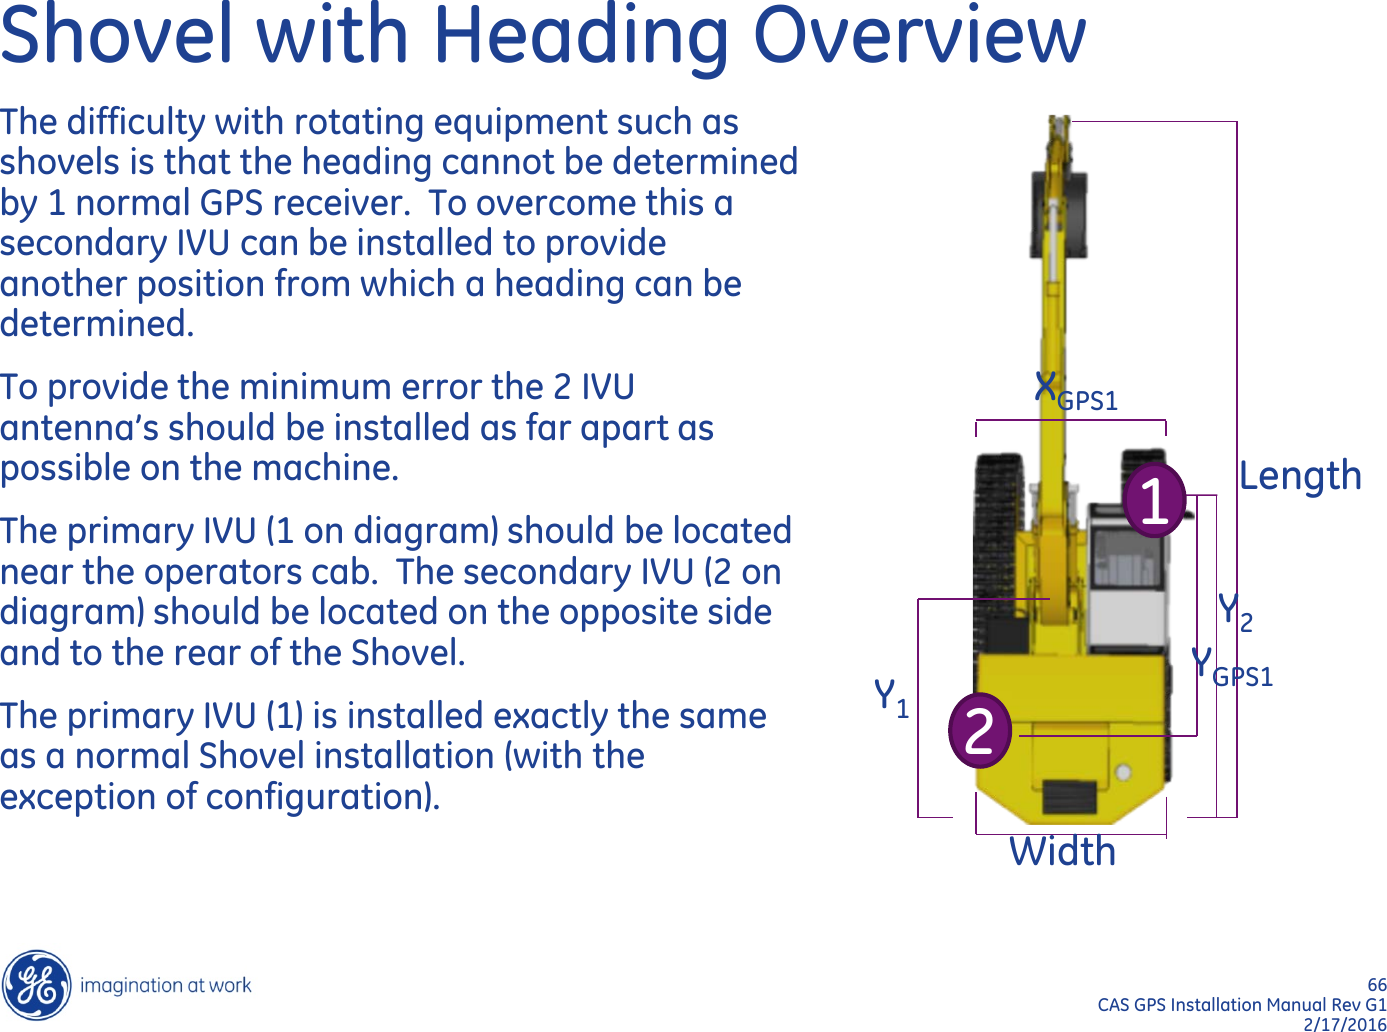 66  CAS GPS Installation Manual Rev G1 2/17/2016 Shovel with Heading Overview The difficulty with rotating equipment such as shovels is that the heading cannot be determined by 1 normal GPS receiver.  To overcome this a secondary IVU can be installed to provide another position from which a heading can be determined. To provide the minimum error the 2 IVU antenna’s should be installed as far apart as possible on the machine. The primary IVU (1 on diagram) should be located near the operators cab.  The secondary IVU (2 on diagram) should be located on the opposite side and to the rear of the Shovel.  The primary IVU (1) is installed exactly the same as a normal Shovel installation (with the exception of configuration).   Length Width Y1 Y2 XGPS1 YGPS1 1 2 